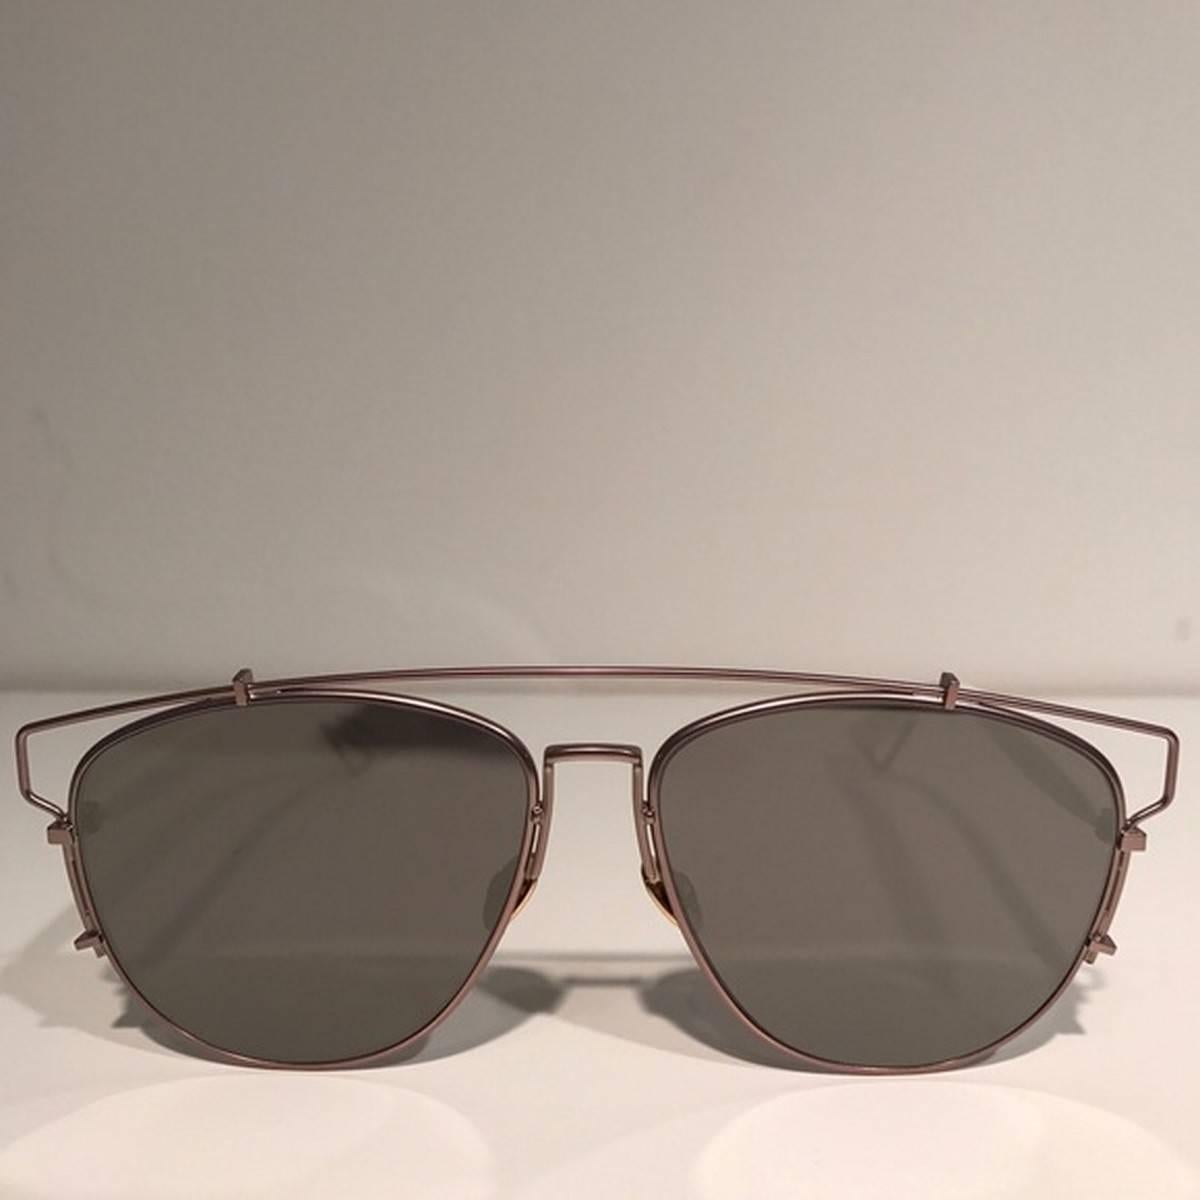 Dior White Mirrored Technologic Sunglasses
Color: White/Silver
Size: OS

Brand new with box.
Unused condition.
No flaws.
Made in Italy.